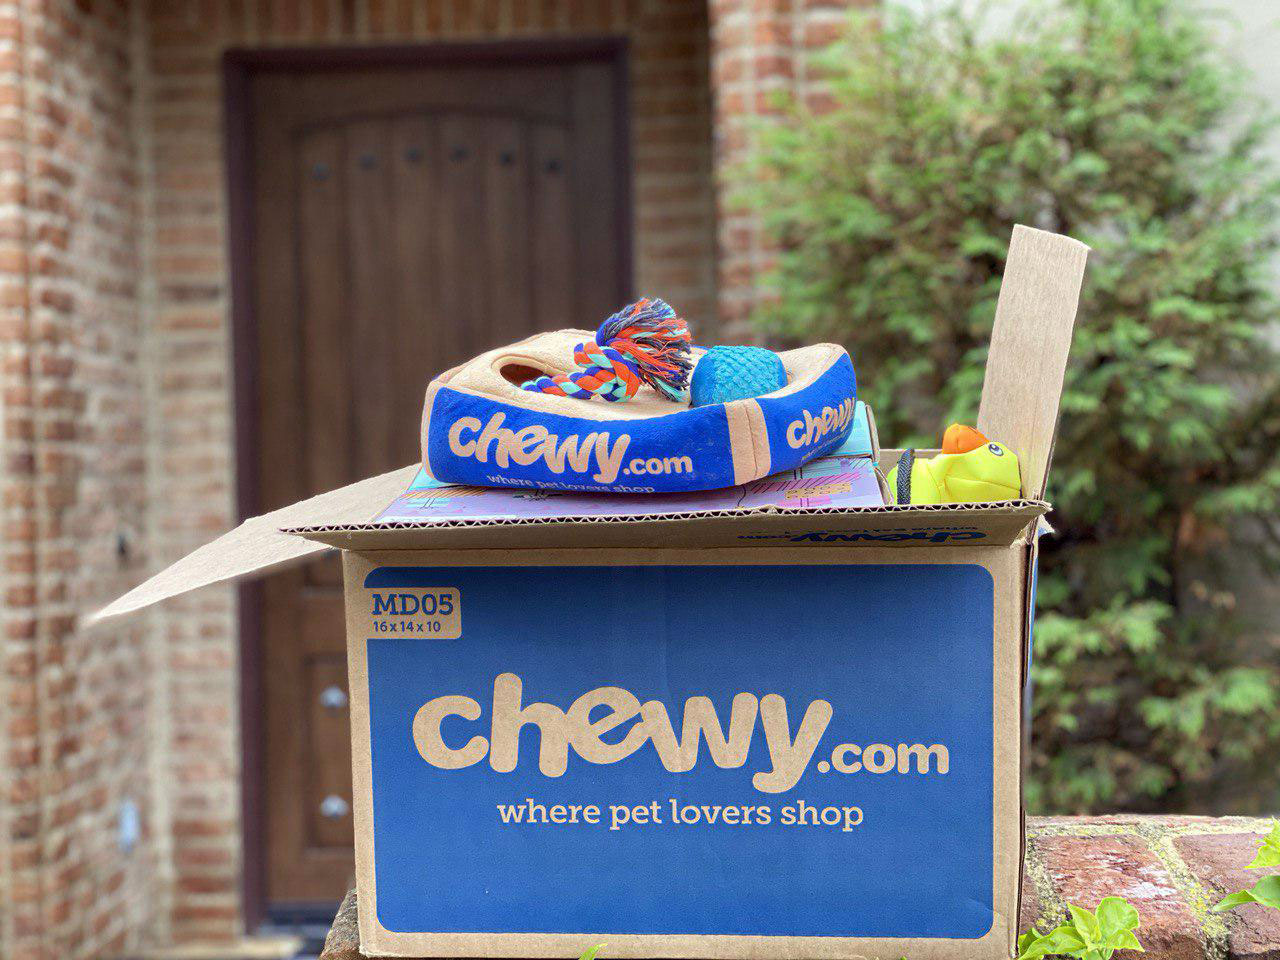 How to Survive With Chewy.com